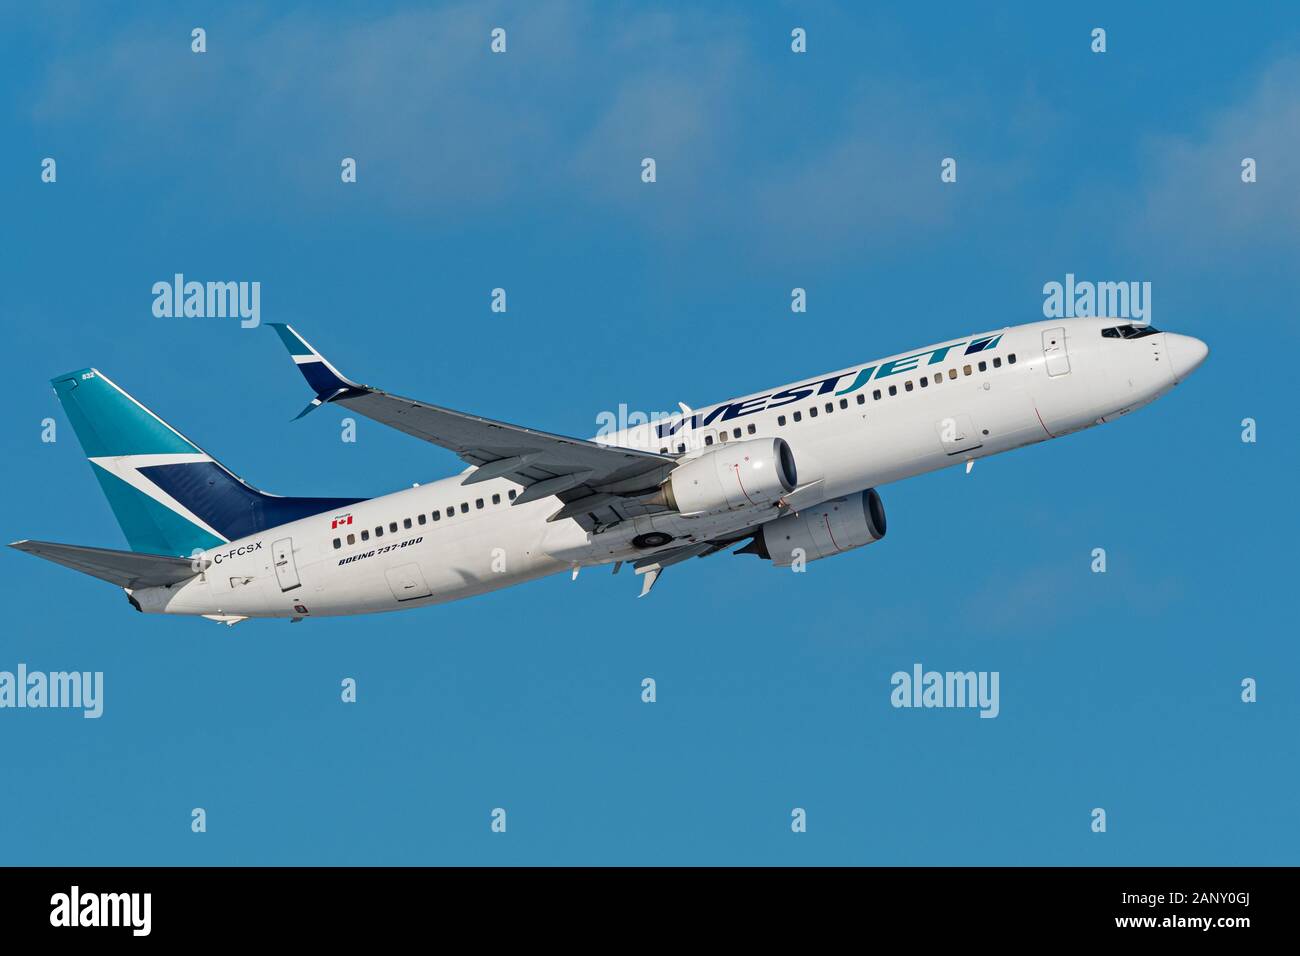 WestJet Airlines plane Boeing 737 (737-800) single-aisle narrow body jet airliner airborne after take-off Stock Photo